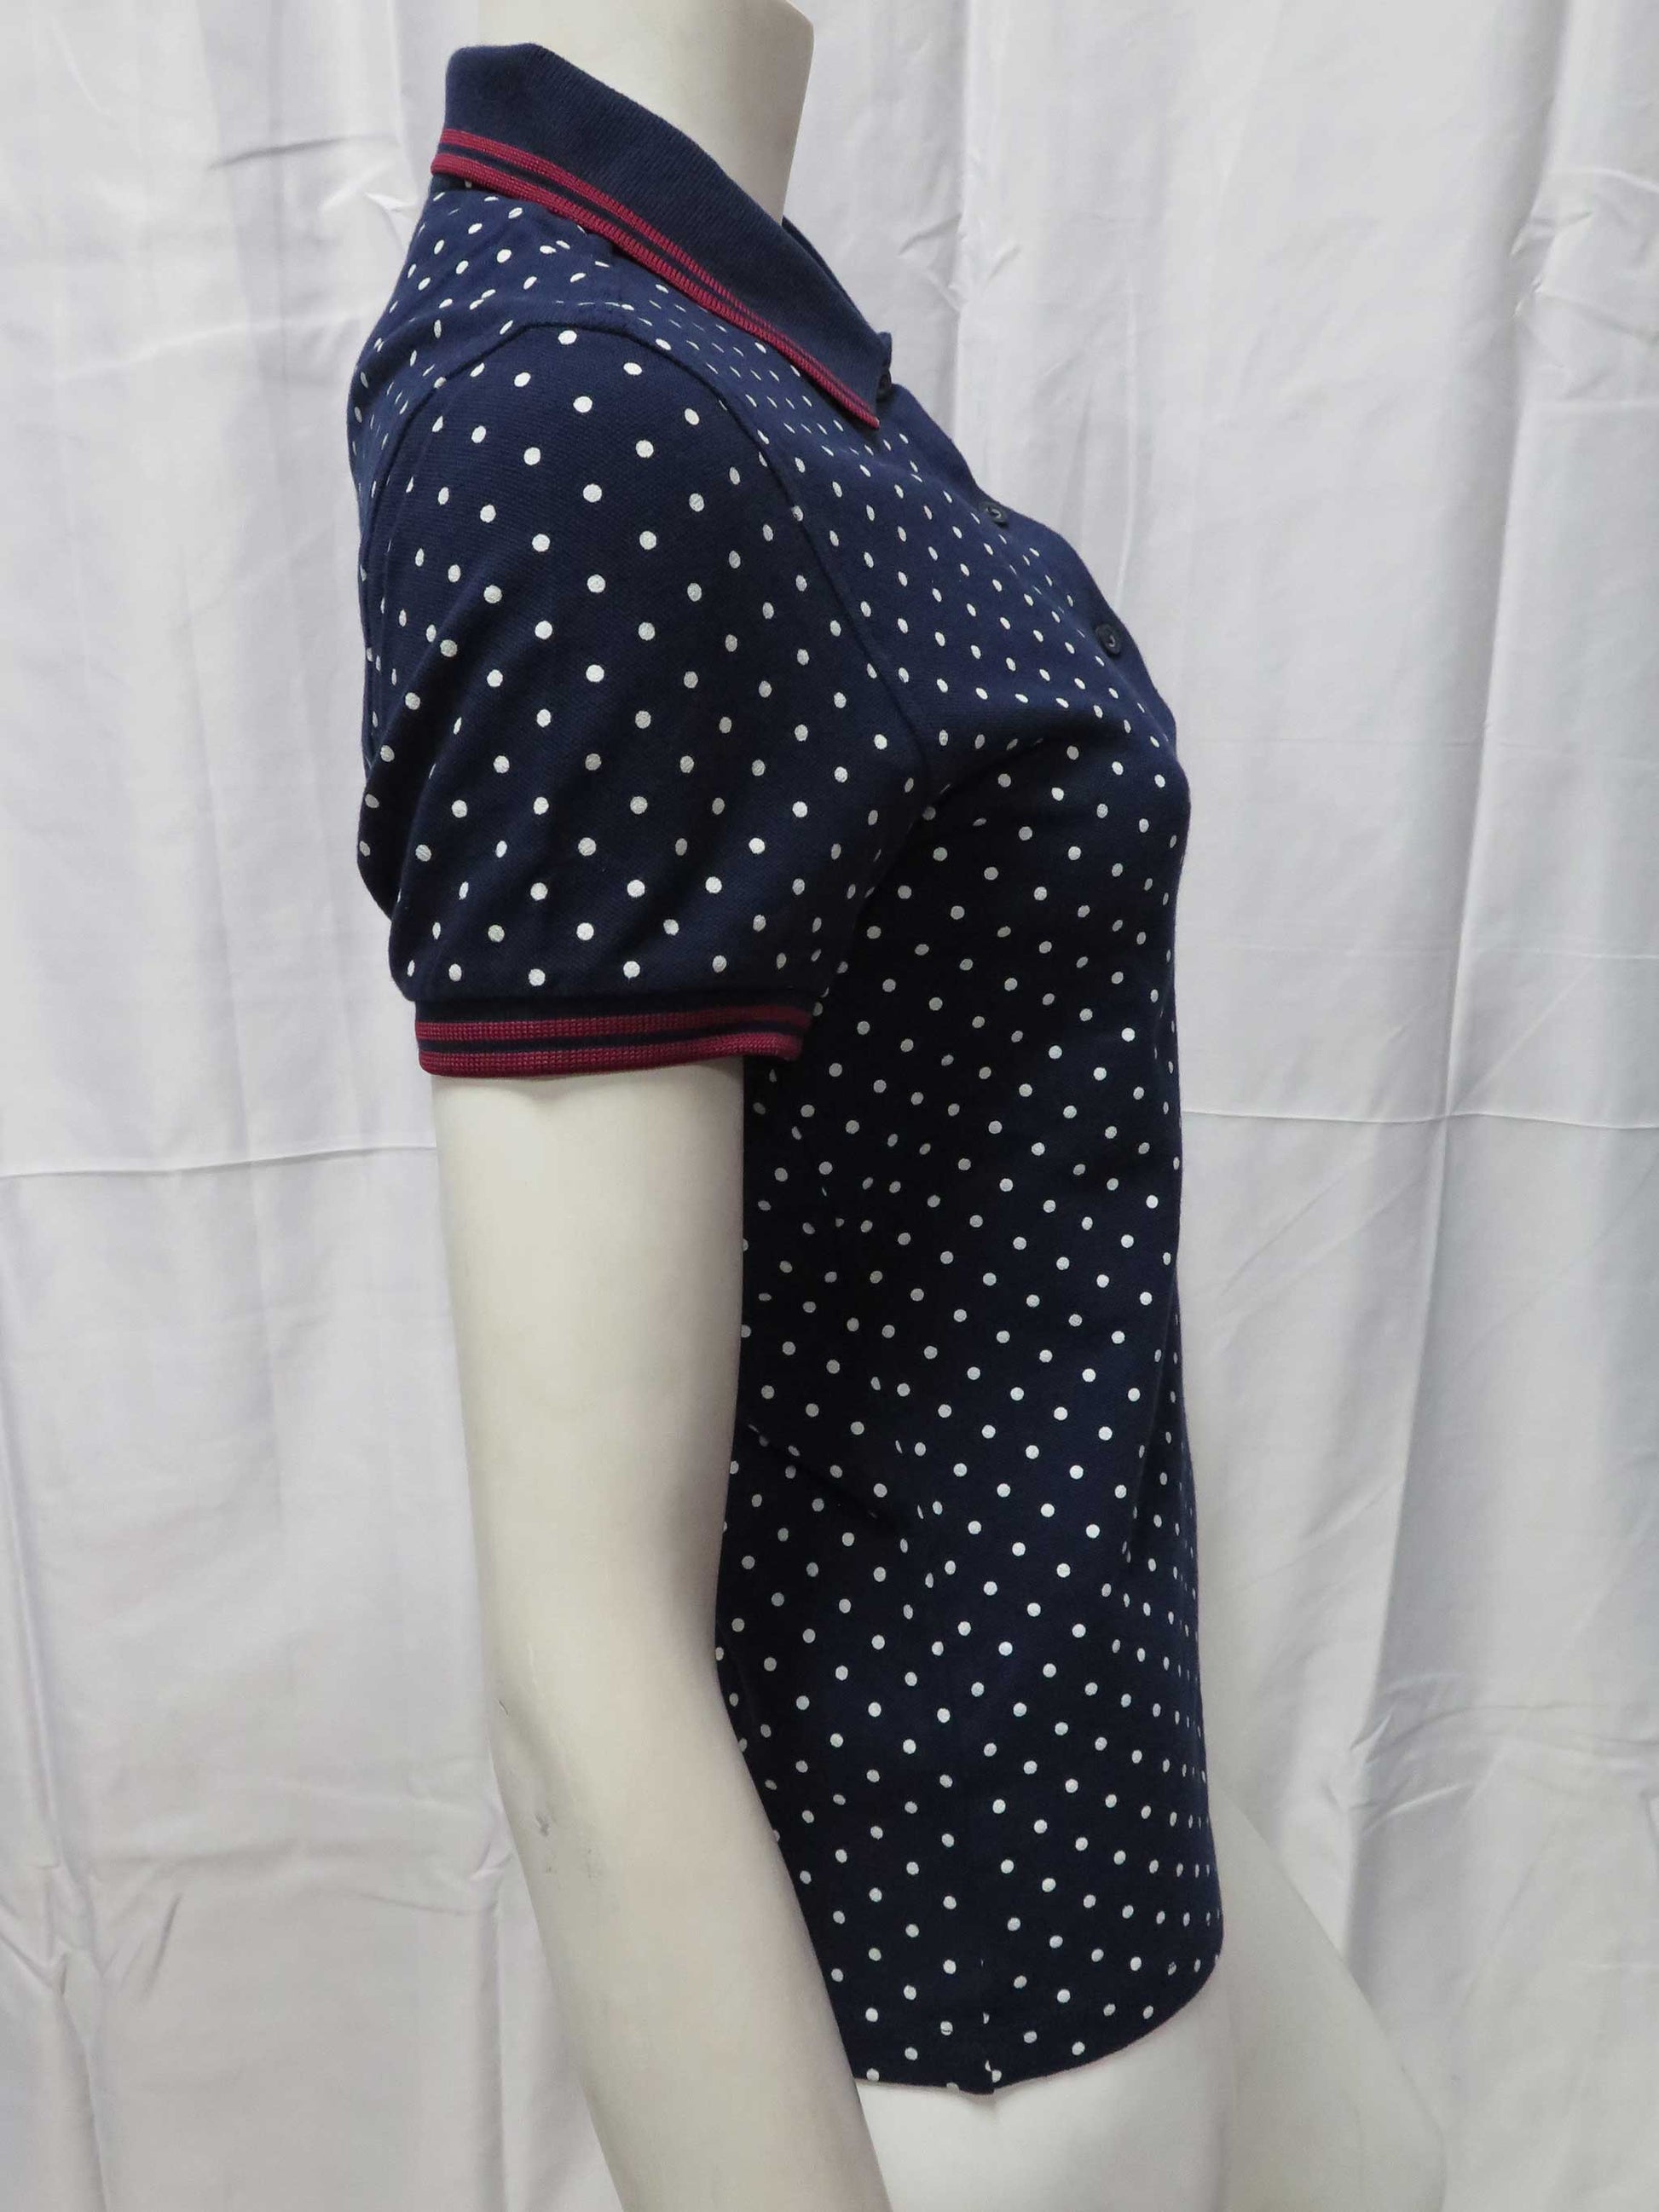 LADIES POLKA DOT TWIN TIPPED FRED PERRY SHIRT (DARK CARBON)